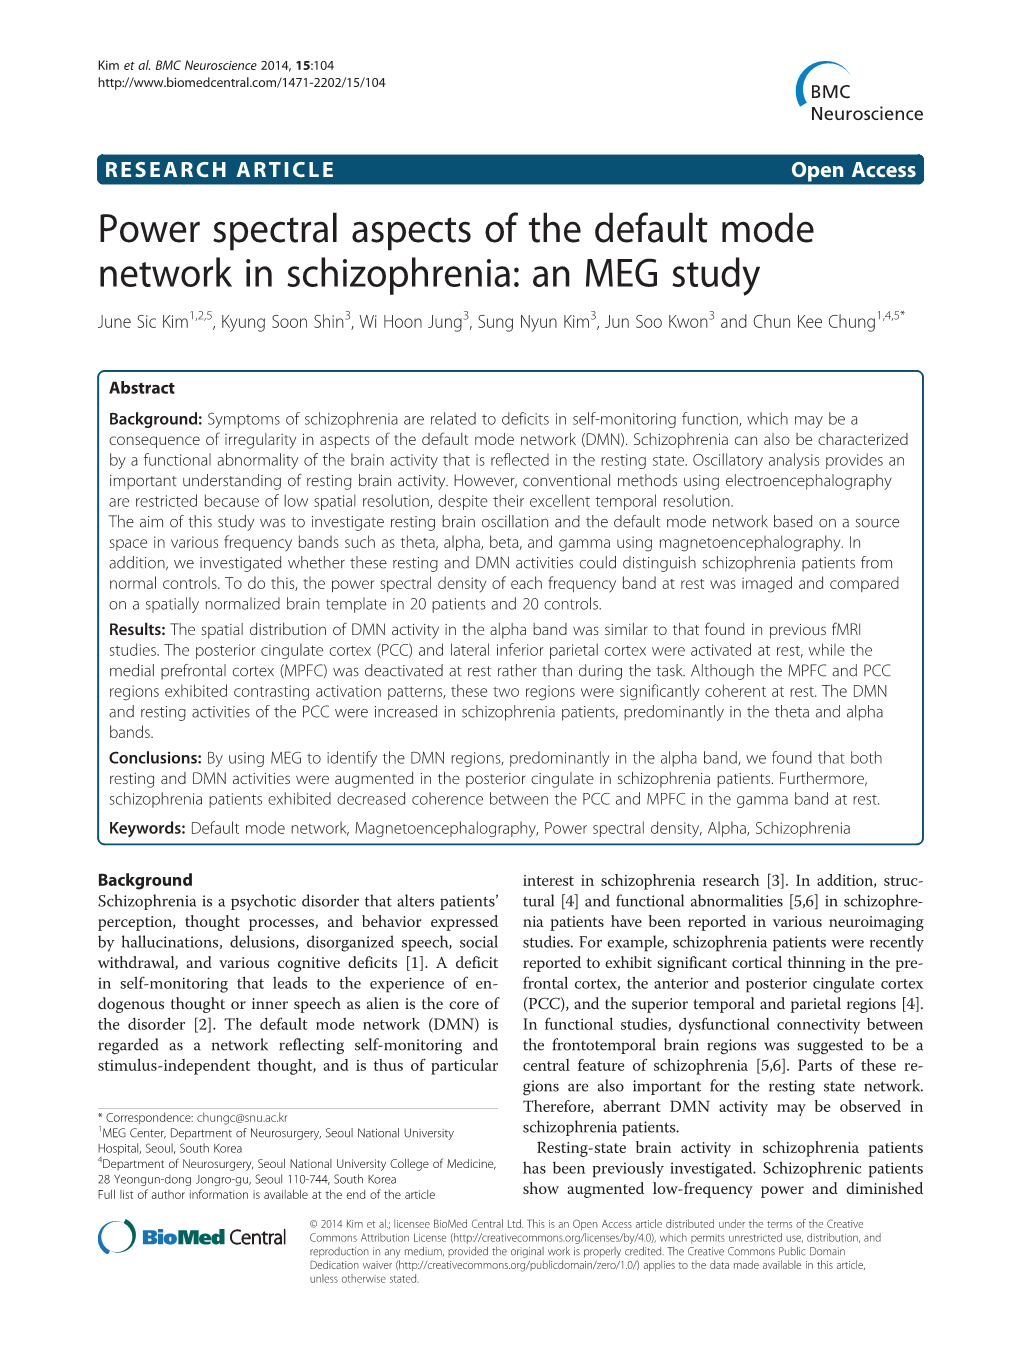 Power Spectral Aspects of the Default Mode Network In